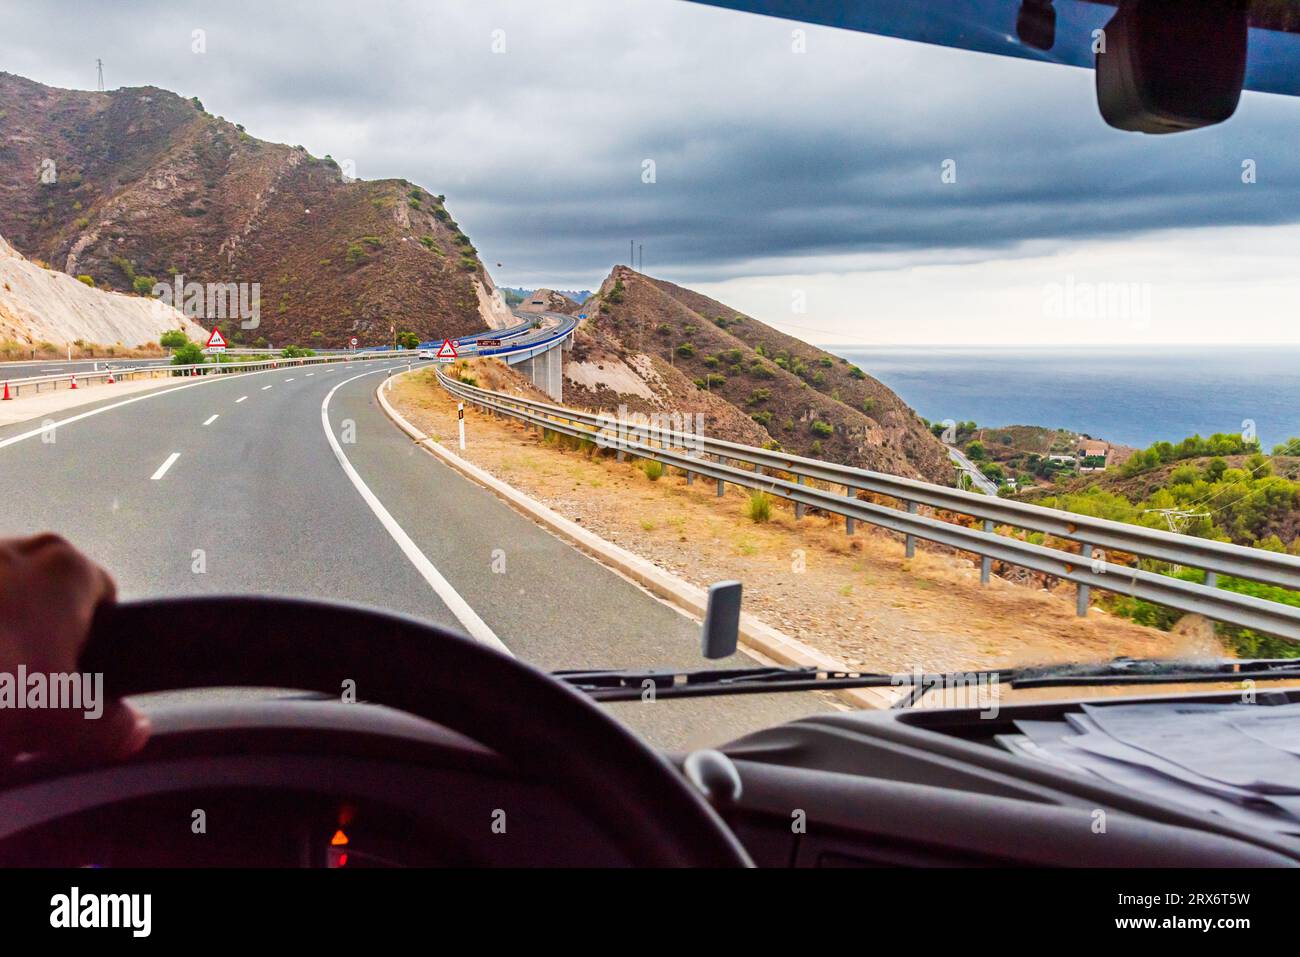 View from the driving position of a truck of a highway that crosses between mountains. Stock Photo